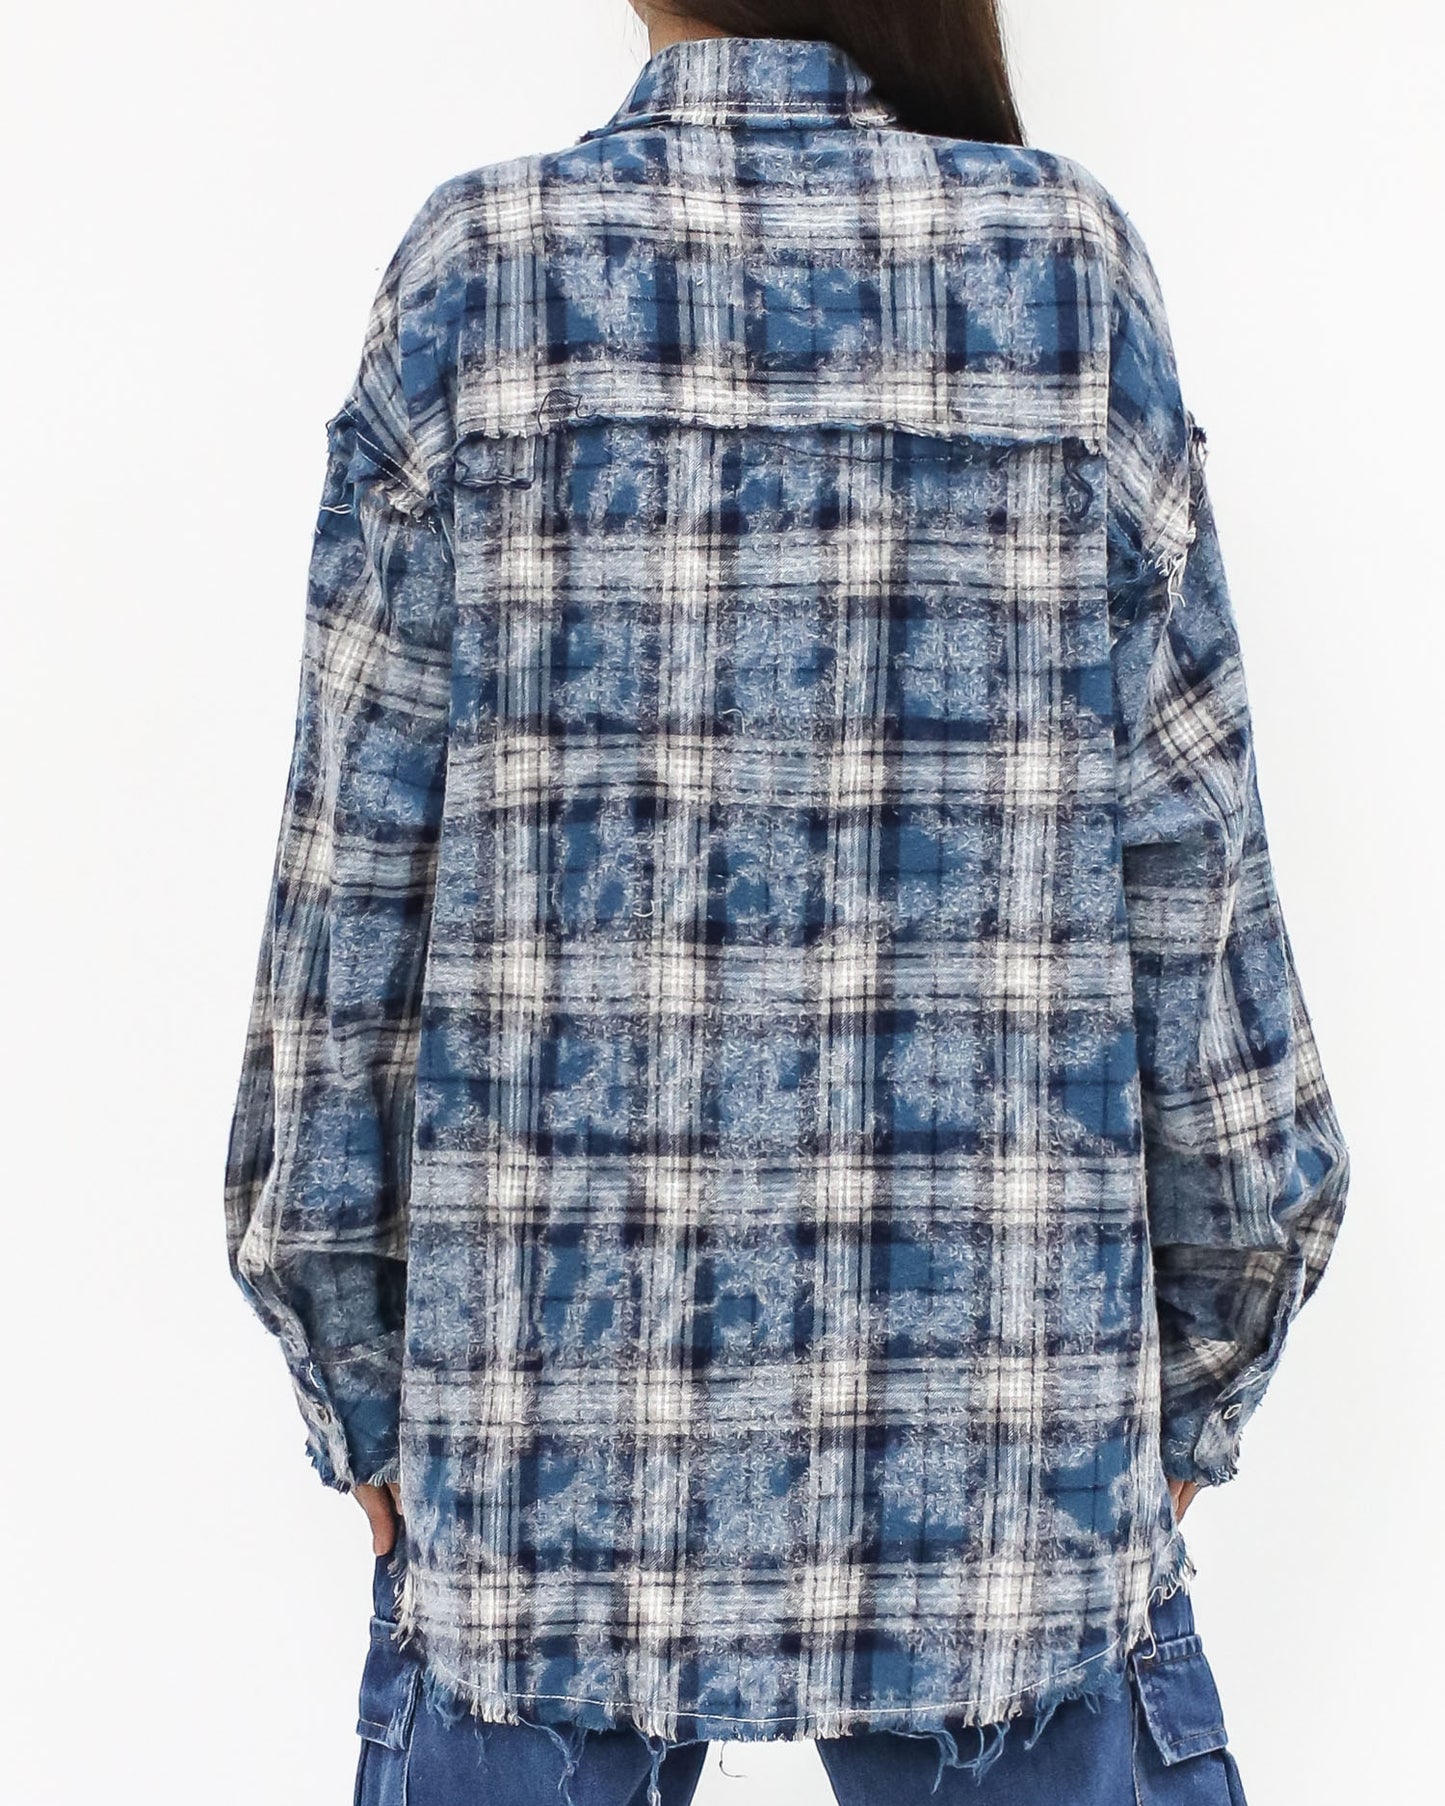 blue checkers wool blended shirt *pre-order*